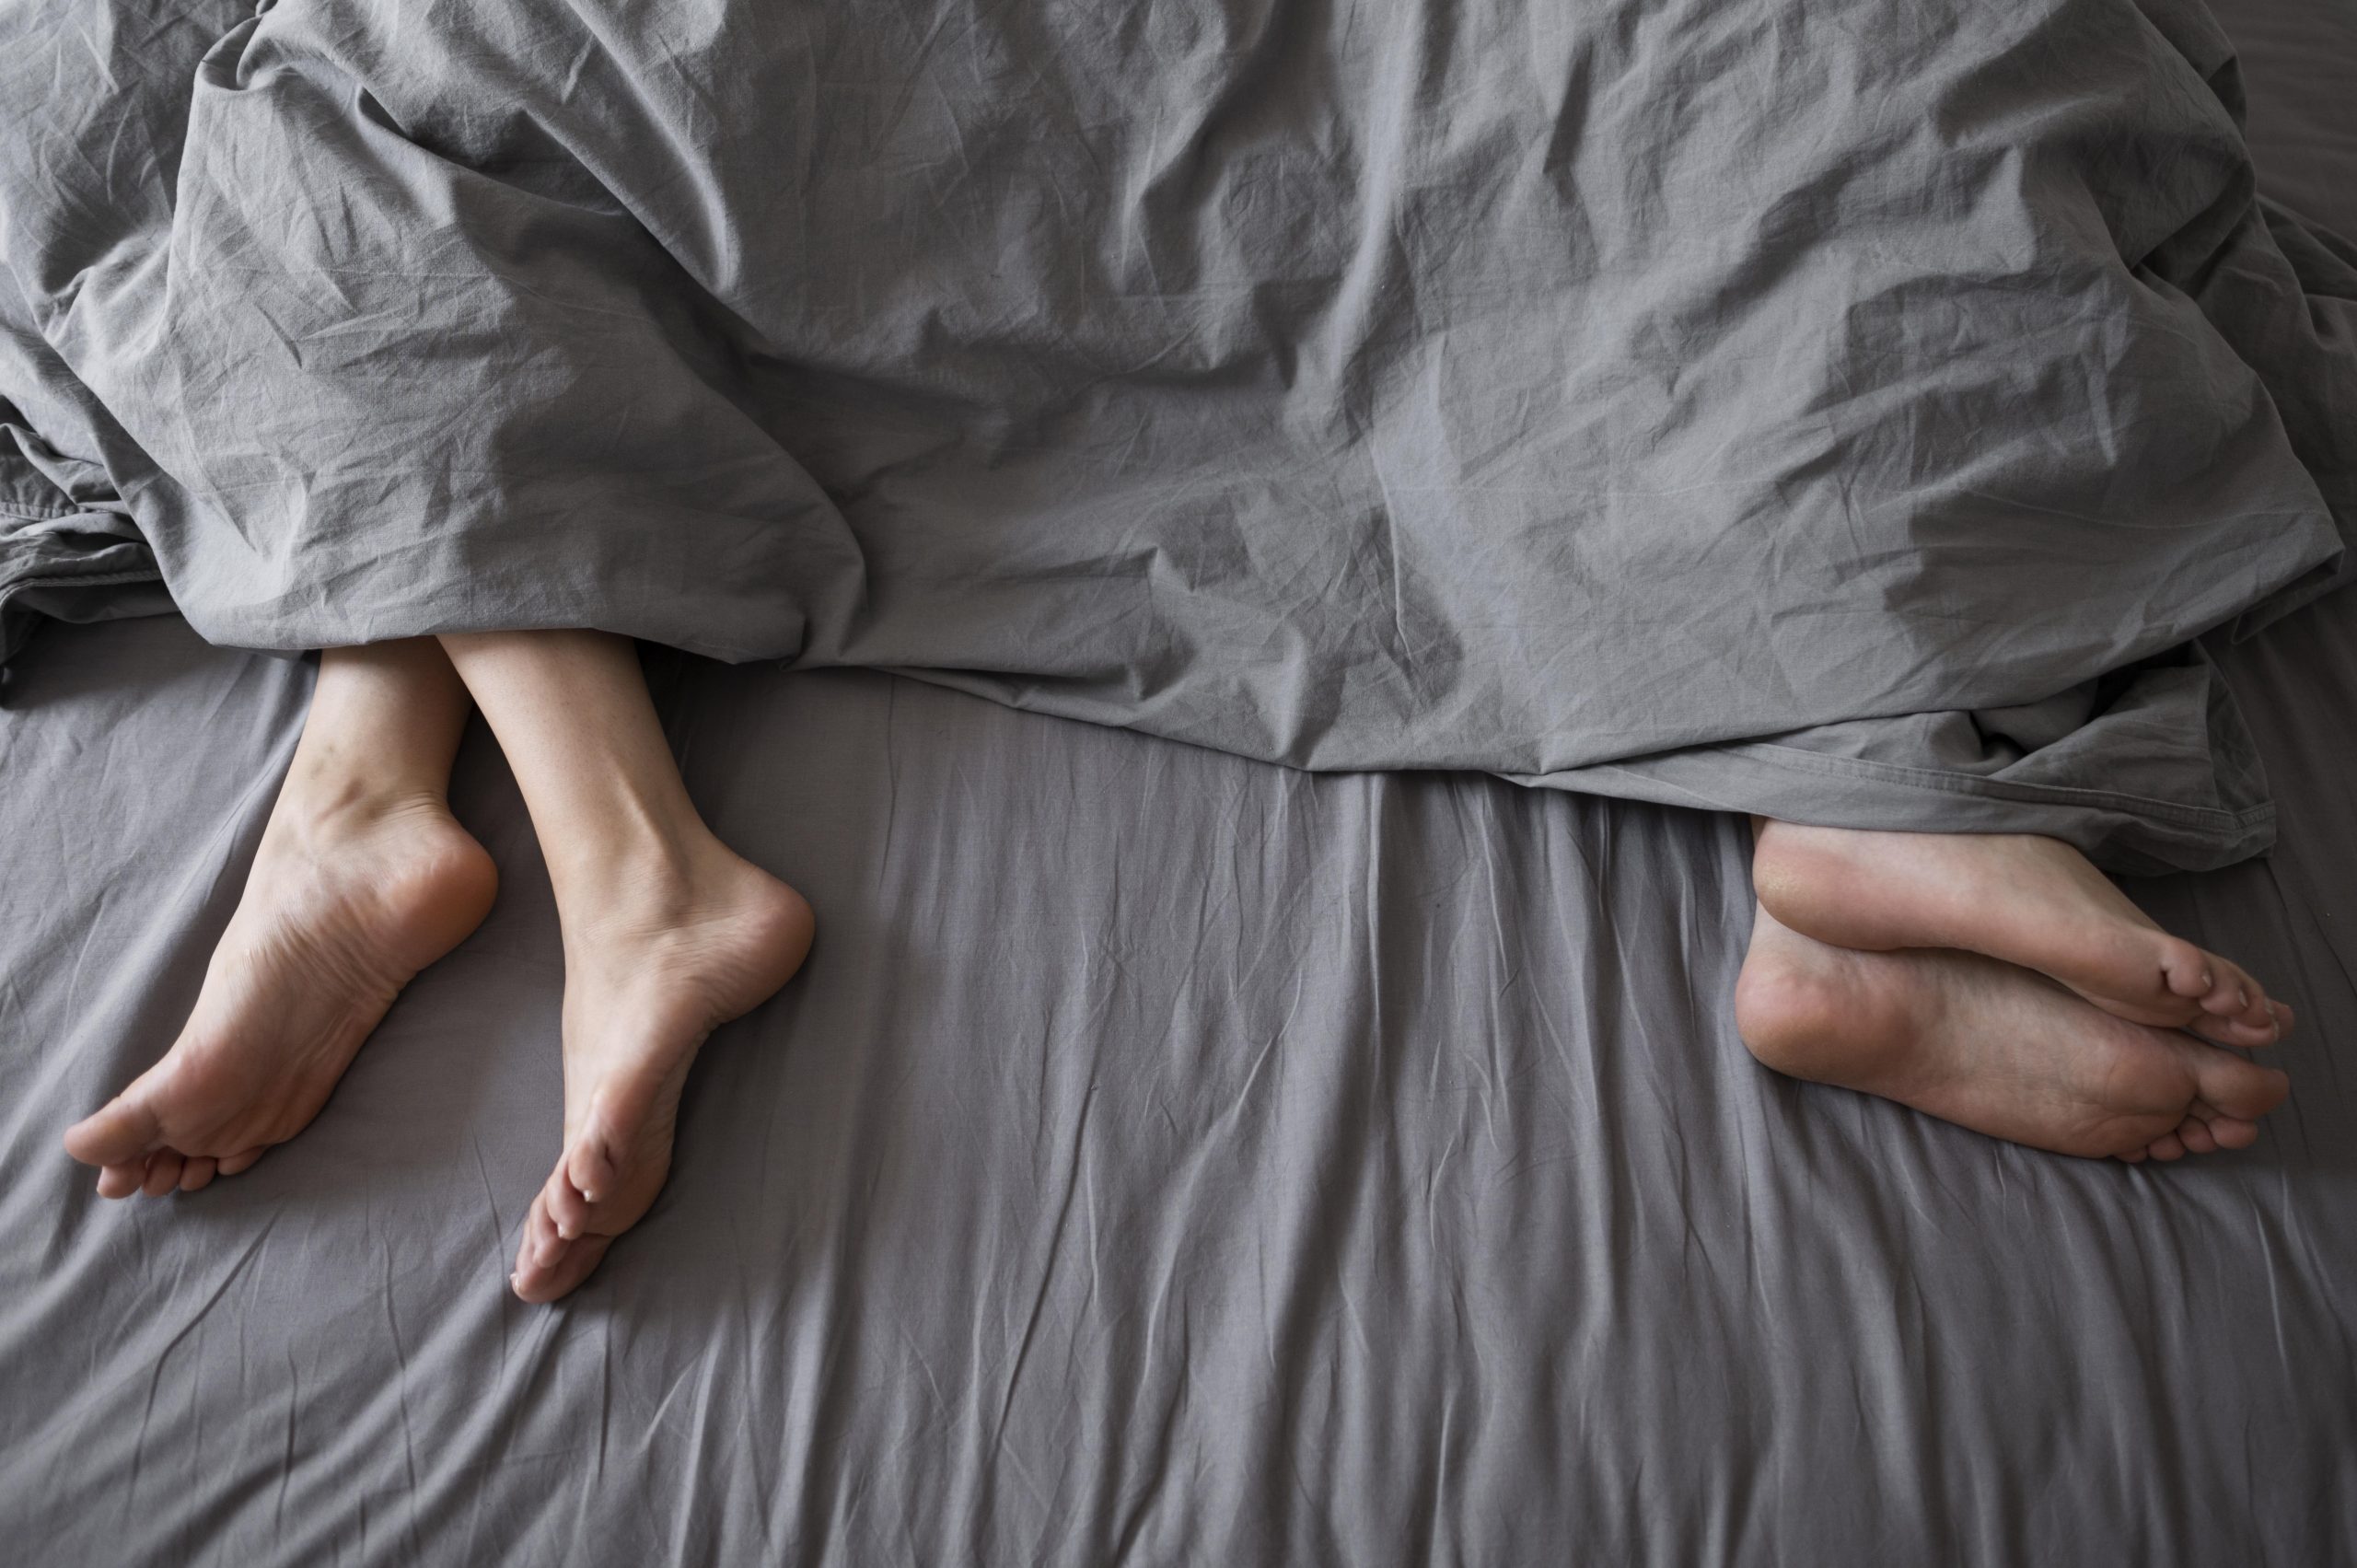 Couple sleeping far away from each other due to sex-related issues. Marriage counselling can help.